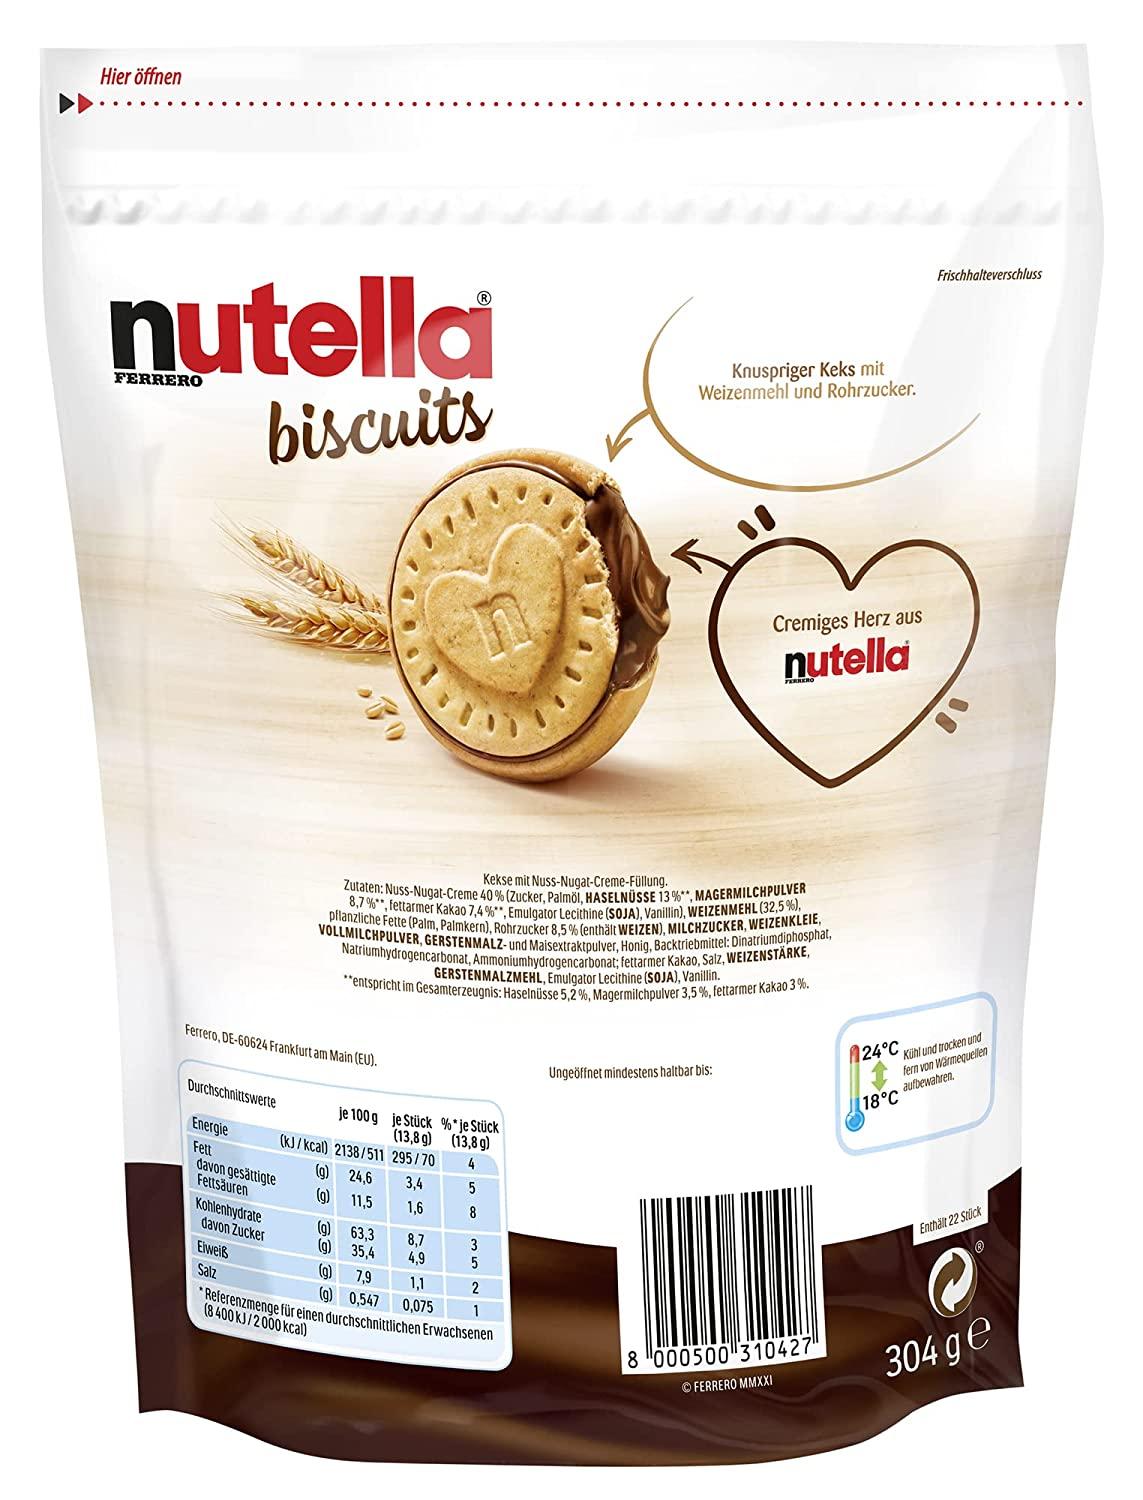 Nutella Biscuits Resealable Bag 10.72 Oz